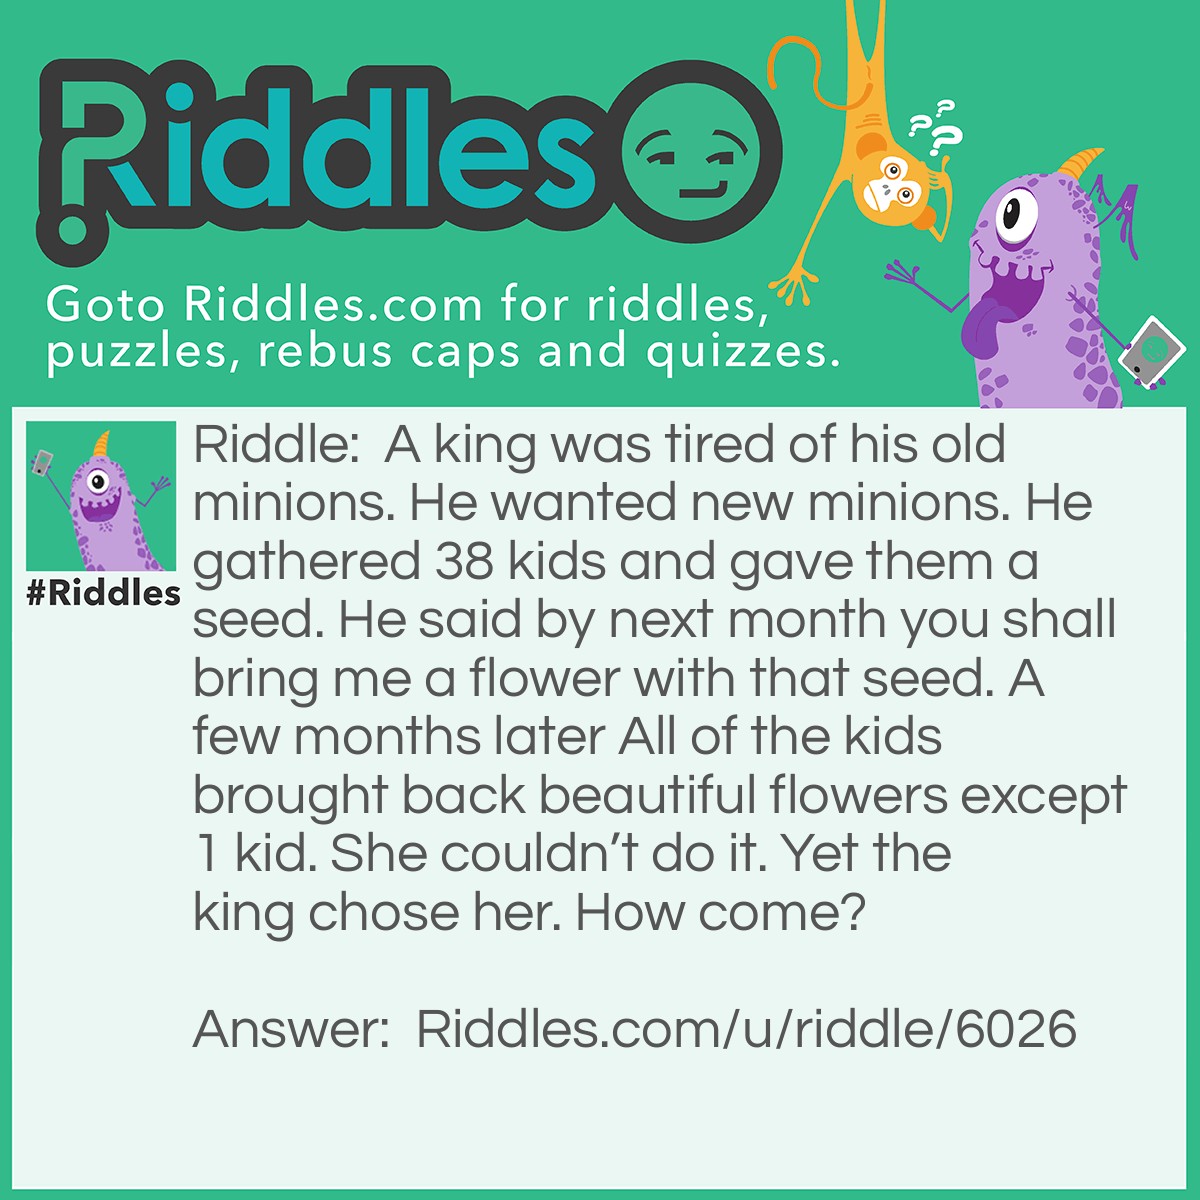 Riddle: A king was tired of his old minions. He wanted new minions. He gathered 38 kids and gave them a seed. He said by next month you shall bring me a flower with that seed. A few months later All of the kids brought back beautiful flowers except 1 kid. She couldn't do it. Yet the king chose her. How come? Answer: It was a seed that is unable to grow meaning that everyone lied except that one kid. Good job to not lying